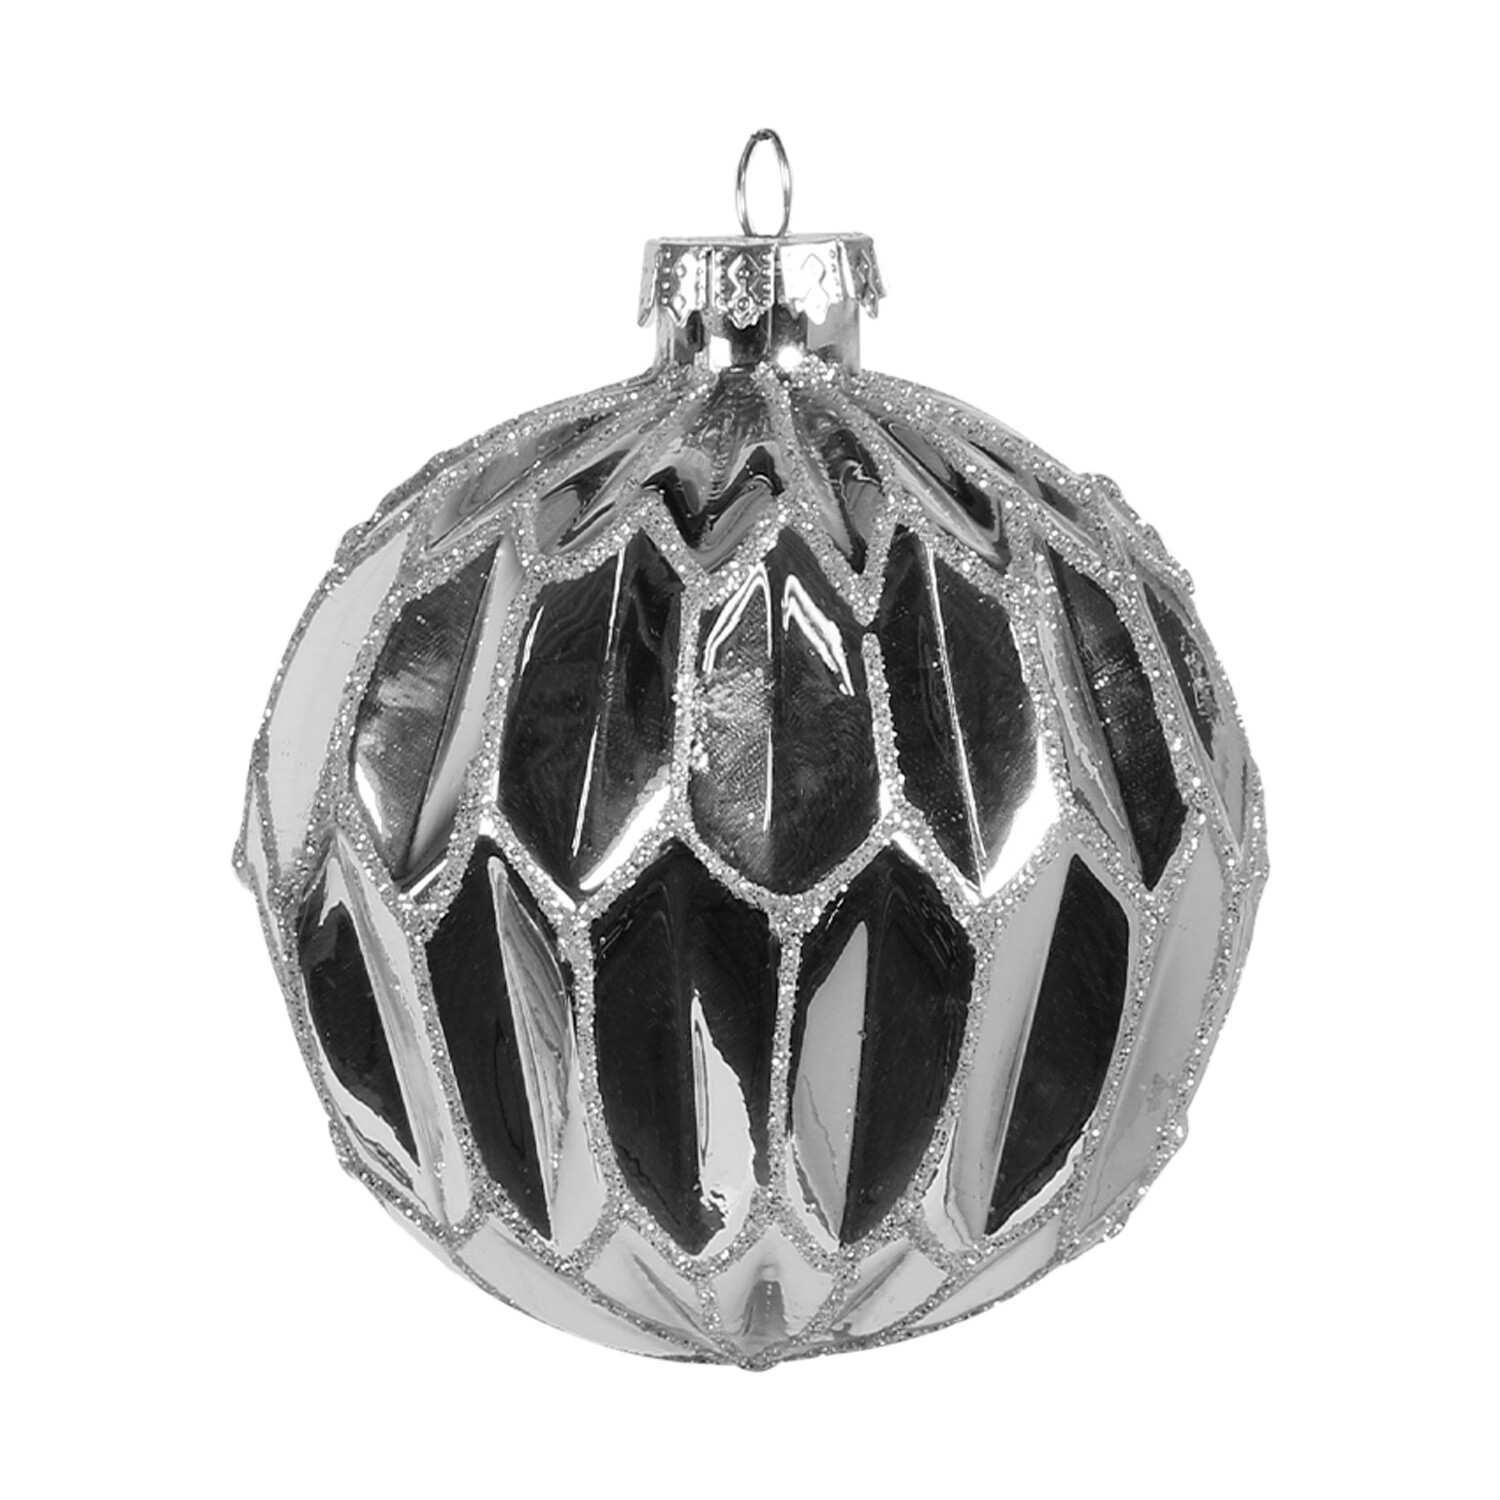 Single Frosted Fairytale Silver Ridged Bauble in Assorted styles Image 1